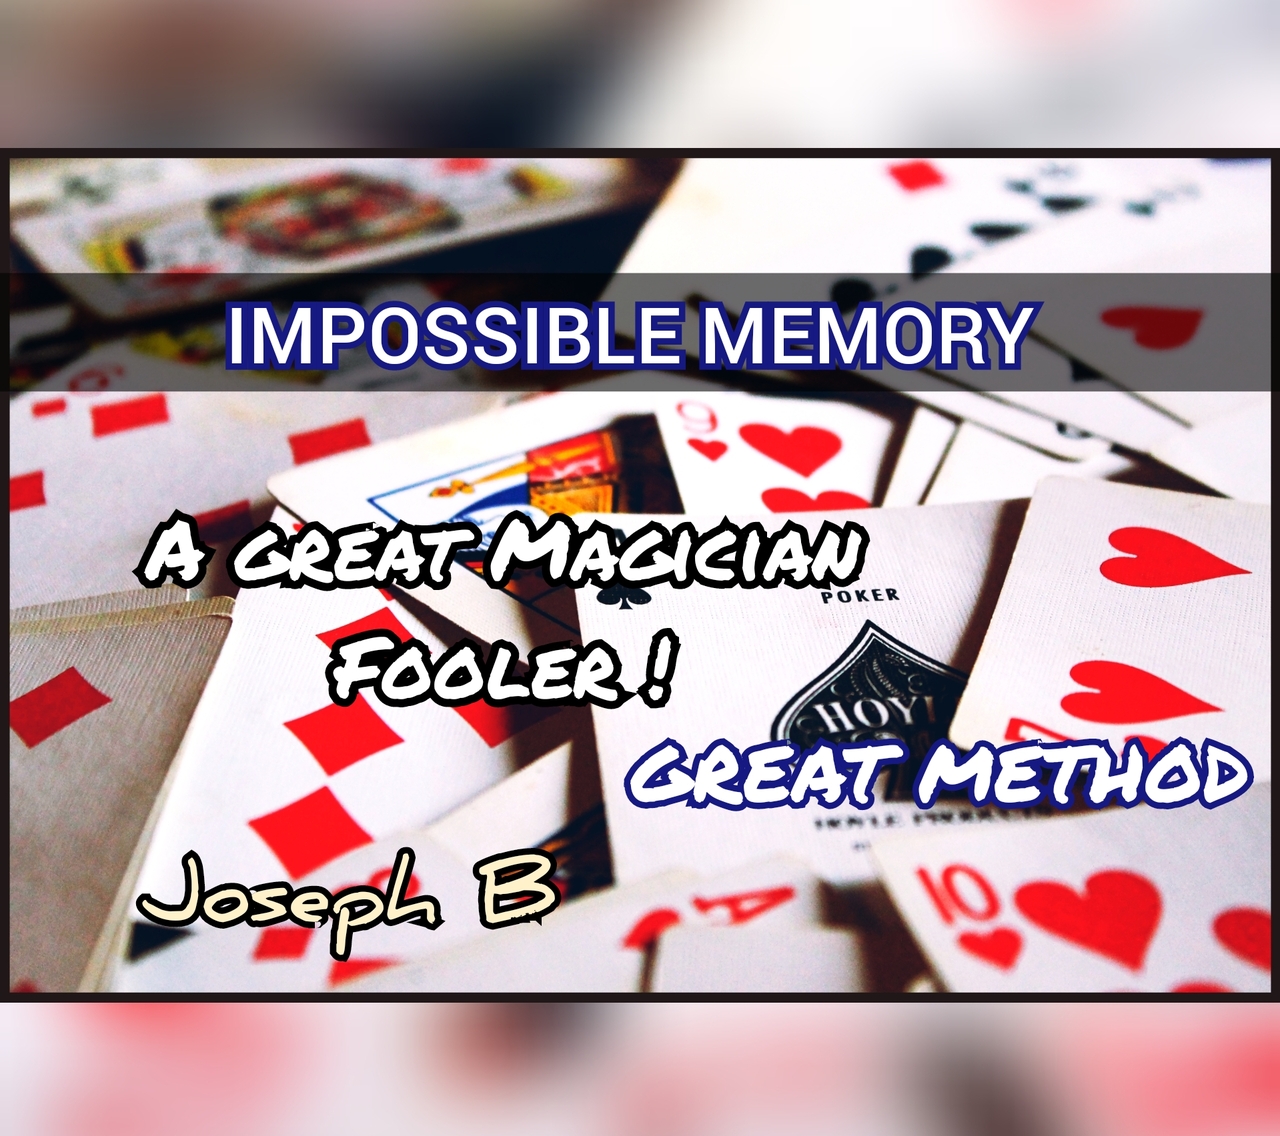 Impossible Memory by Joseph B. (MP4 Video Download)